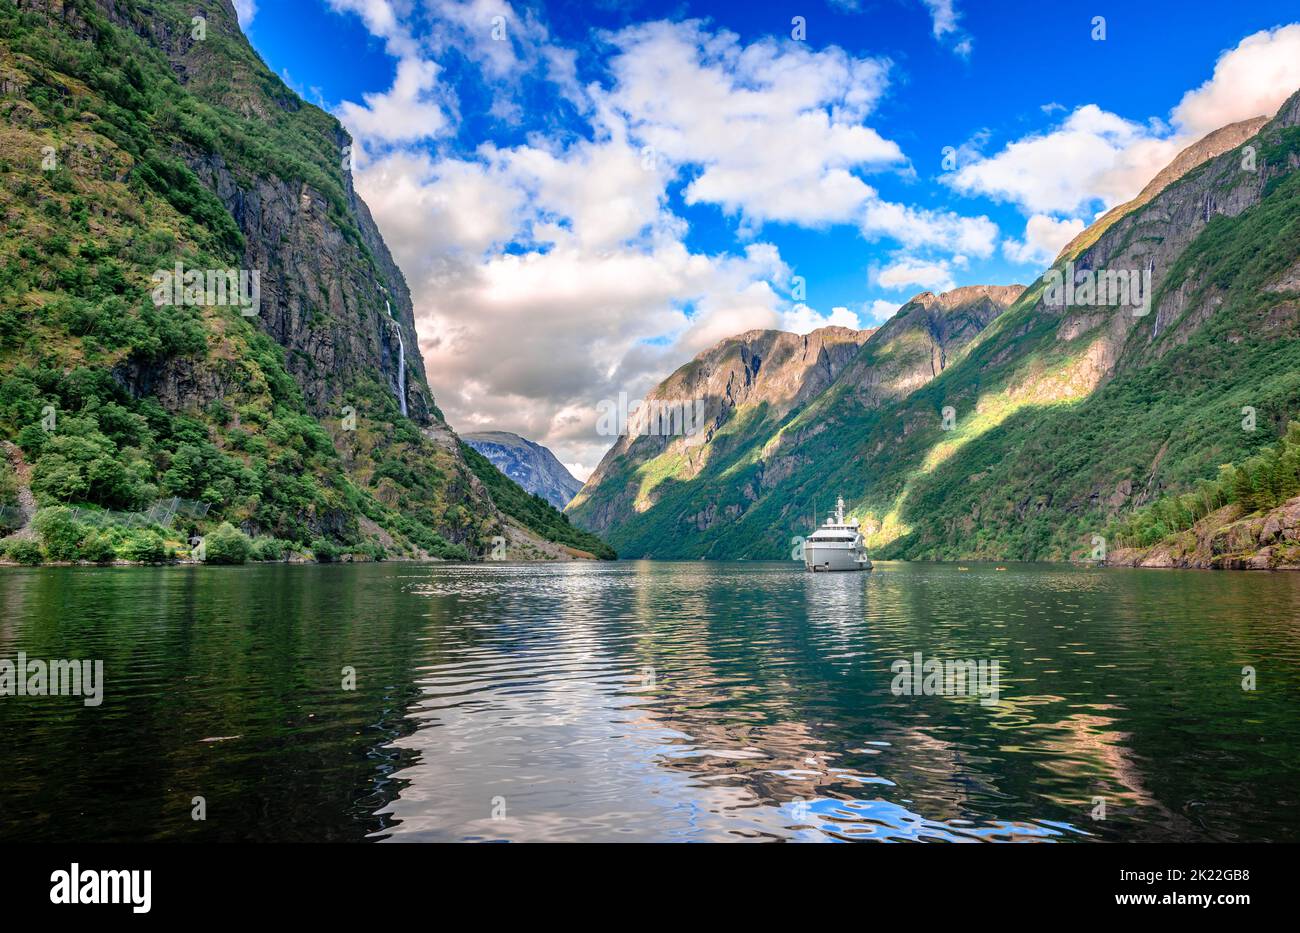 A tourboat sails in Aurlandsfjord, a branch off of the main Sognefjorden, Norway's longest fjord. Breathtaking Norwegian landscape. Stock Photo